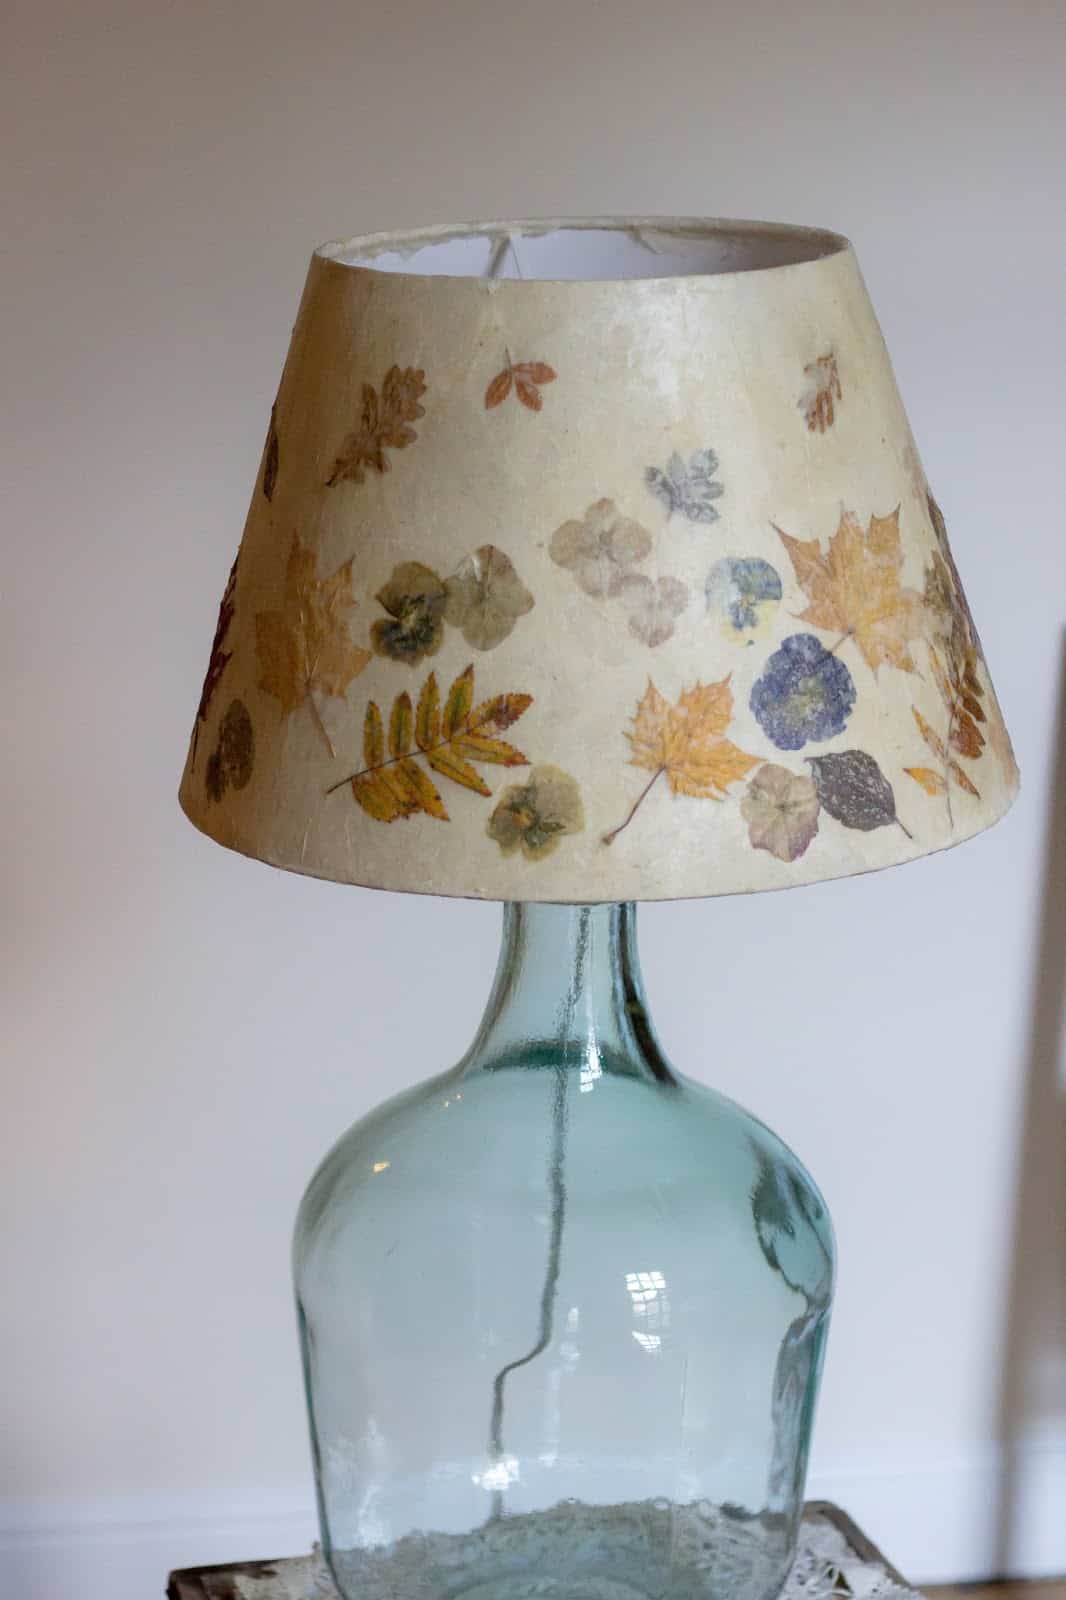 Flower and leaf decoupage lamp shade